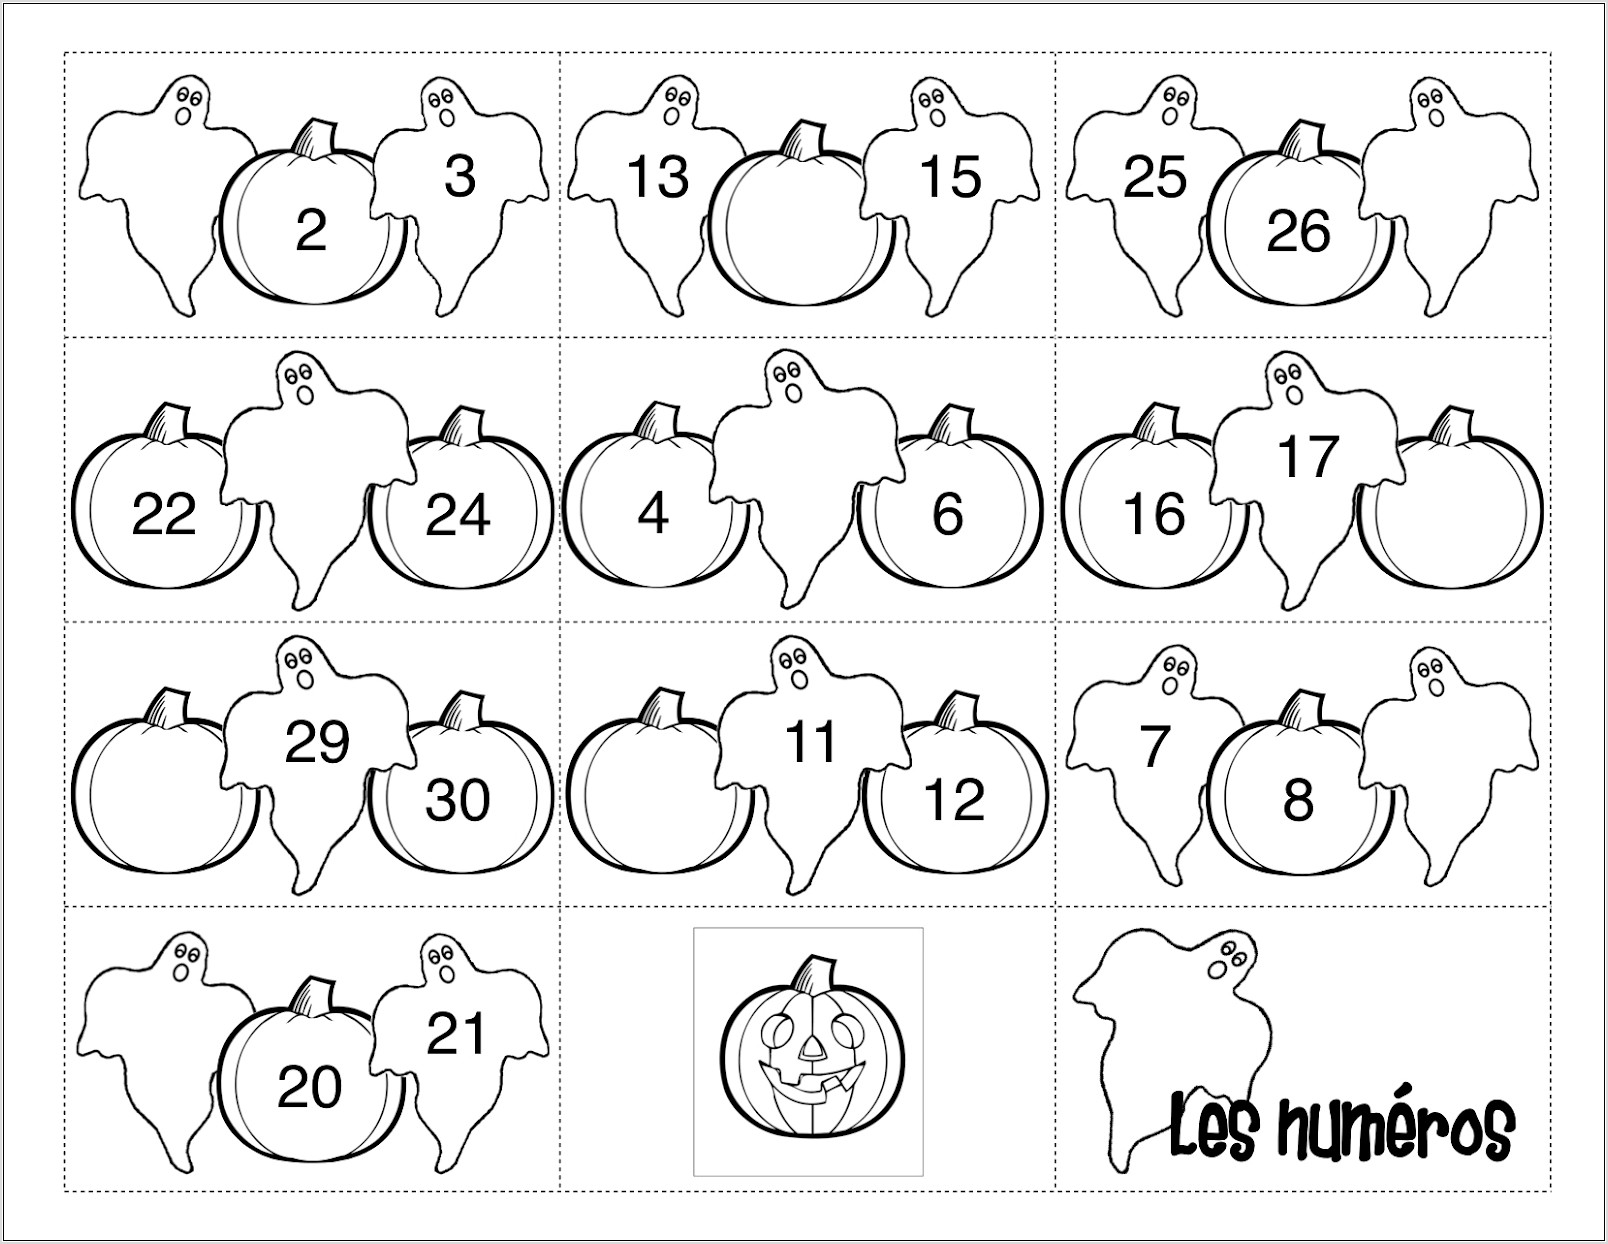 Worksheet For Numbers 1 30